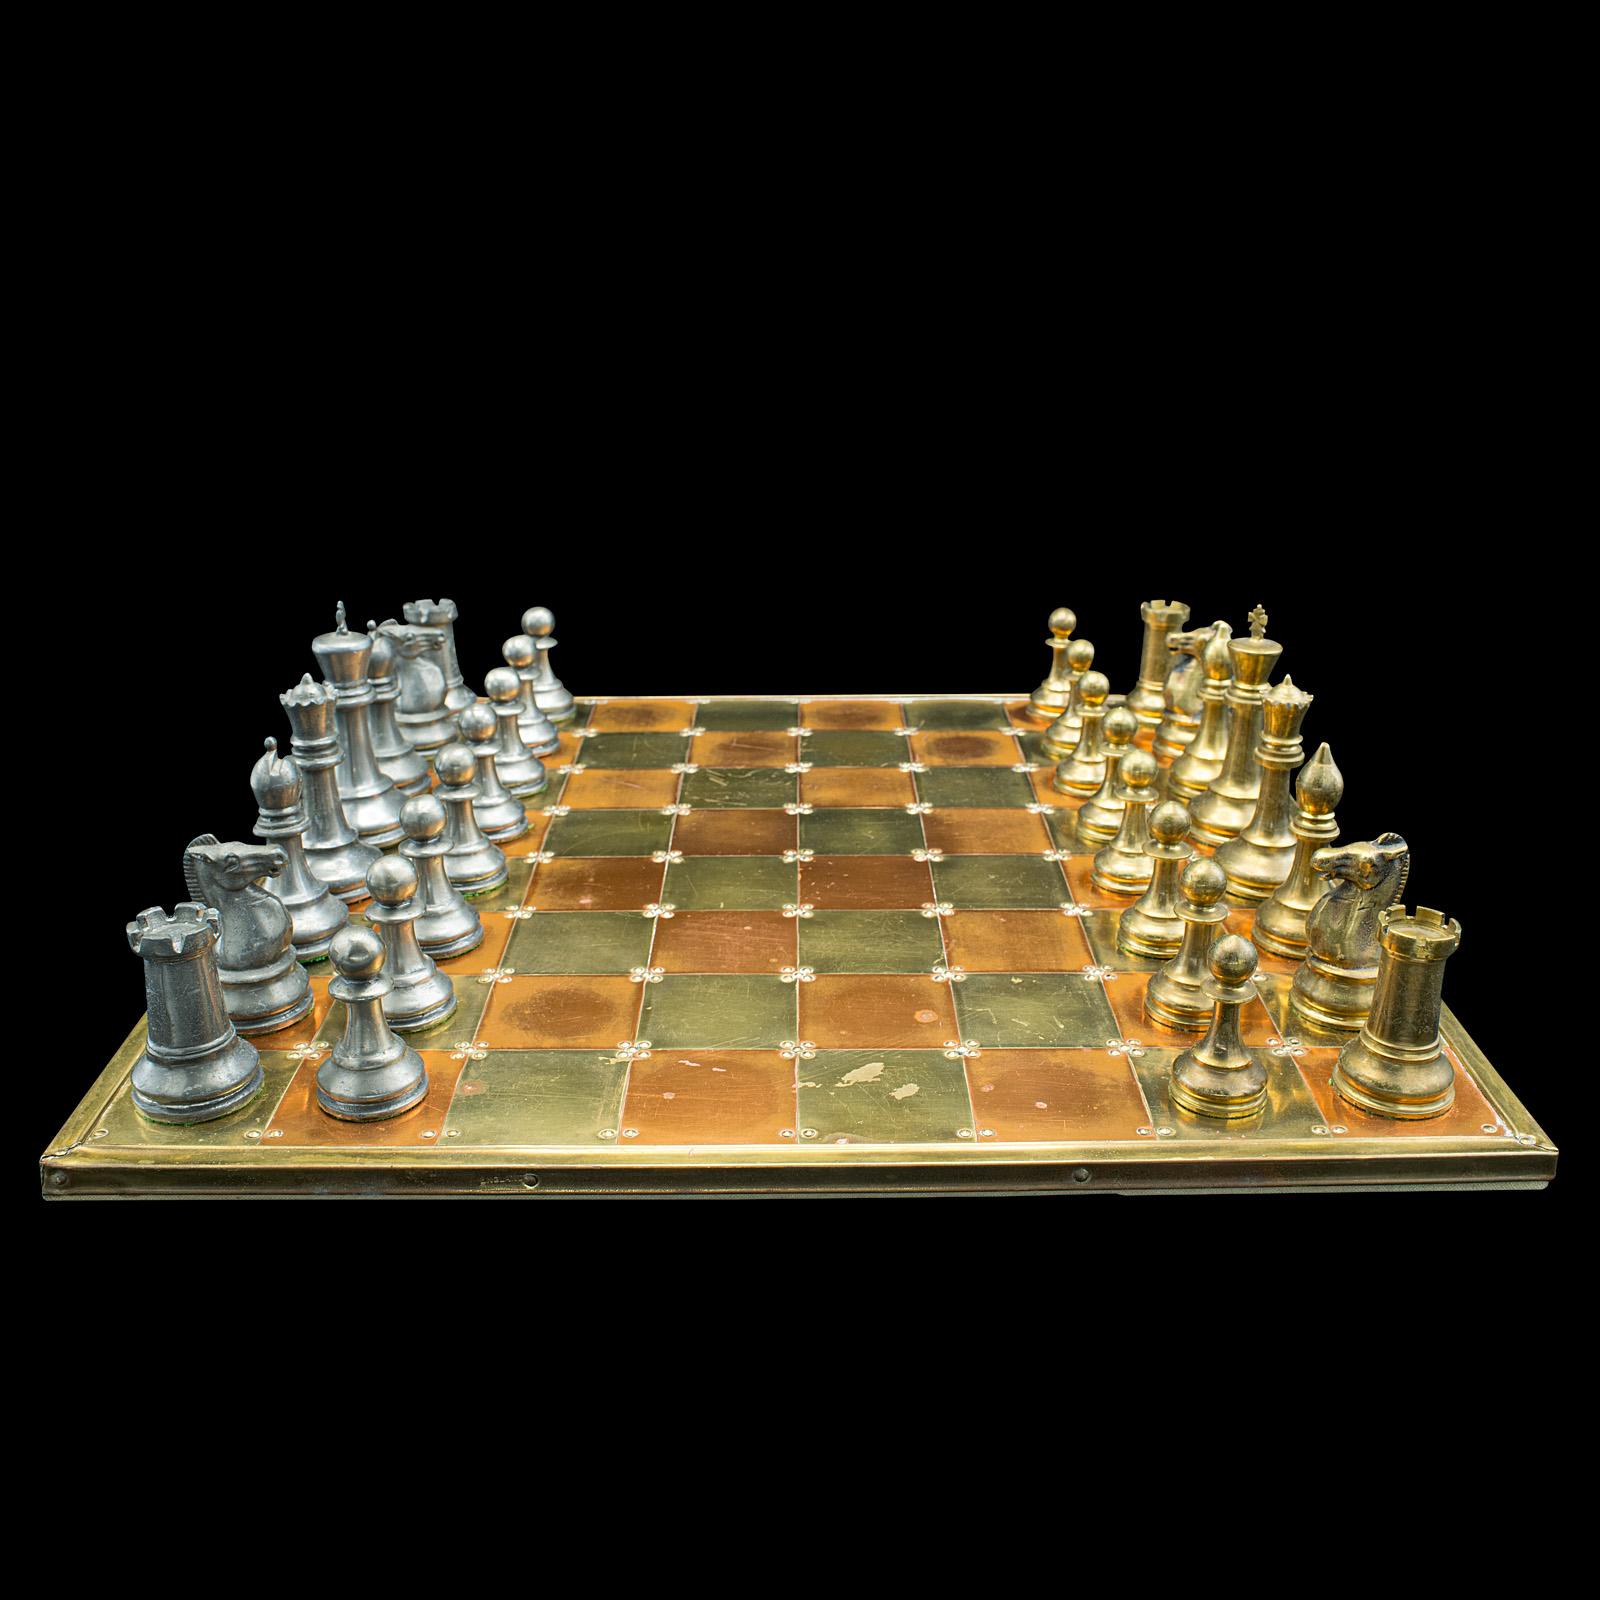 This is a large vintage chess board. An English, brass, copper and pewter brass gaming set, dating to the late 20th century, circa 1980.

Distinctive shimmering appearance to this weighted chess set
Displaying a desirable aged patina